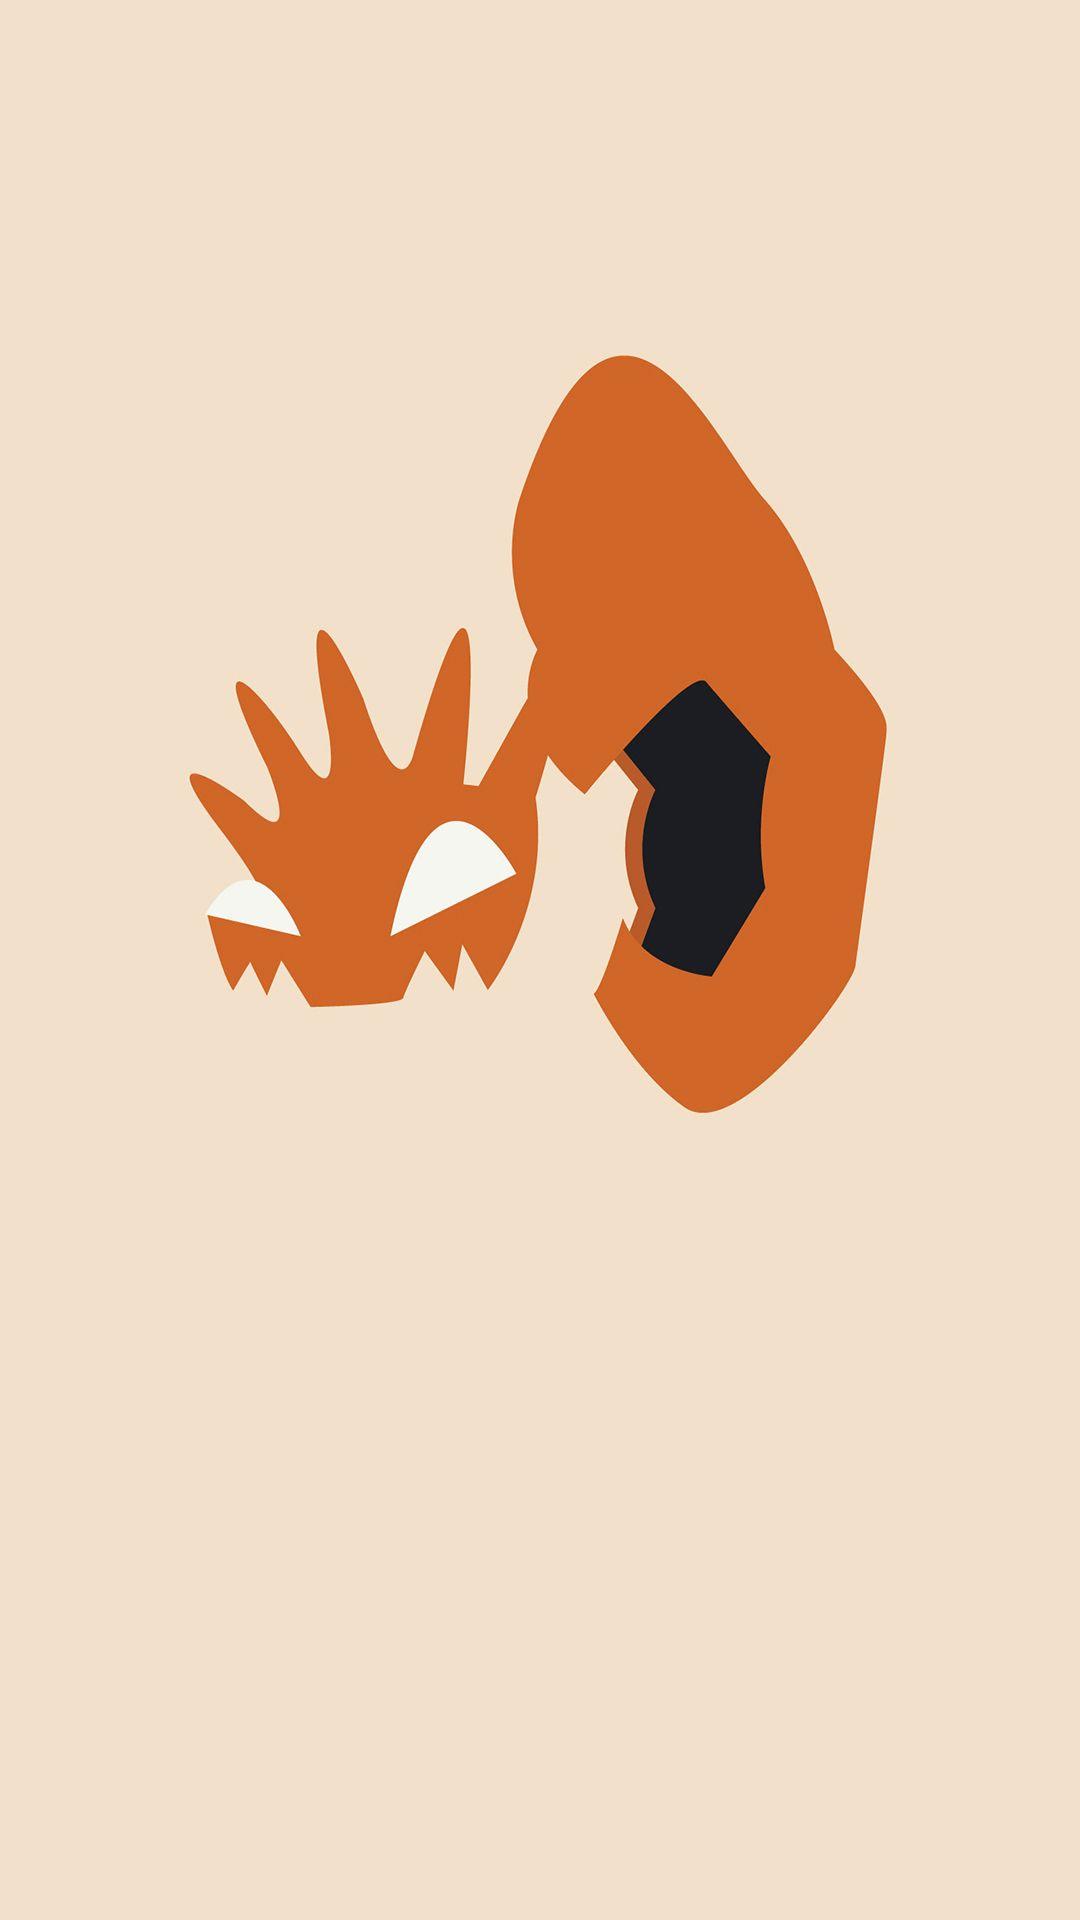 Minimal walls for pokemon fans. Collected and edited by me. Share